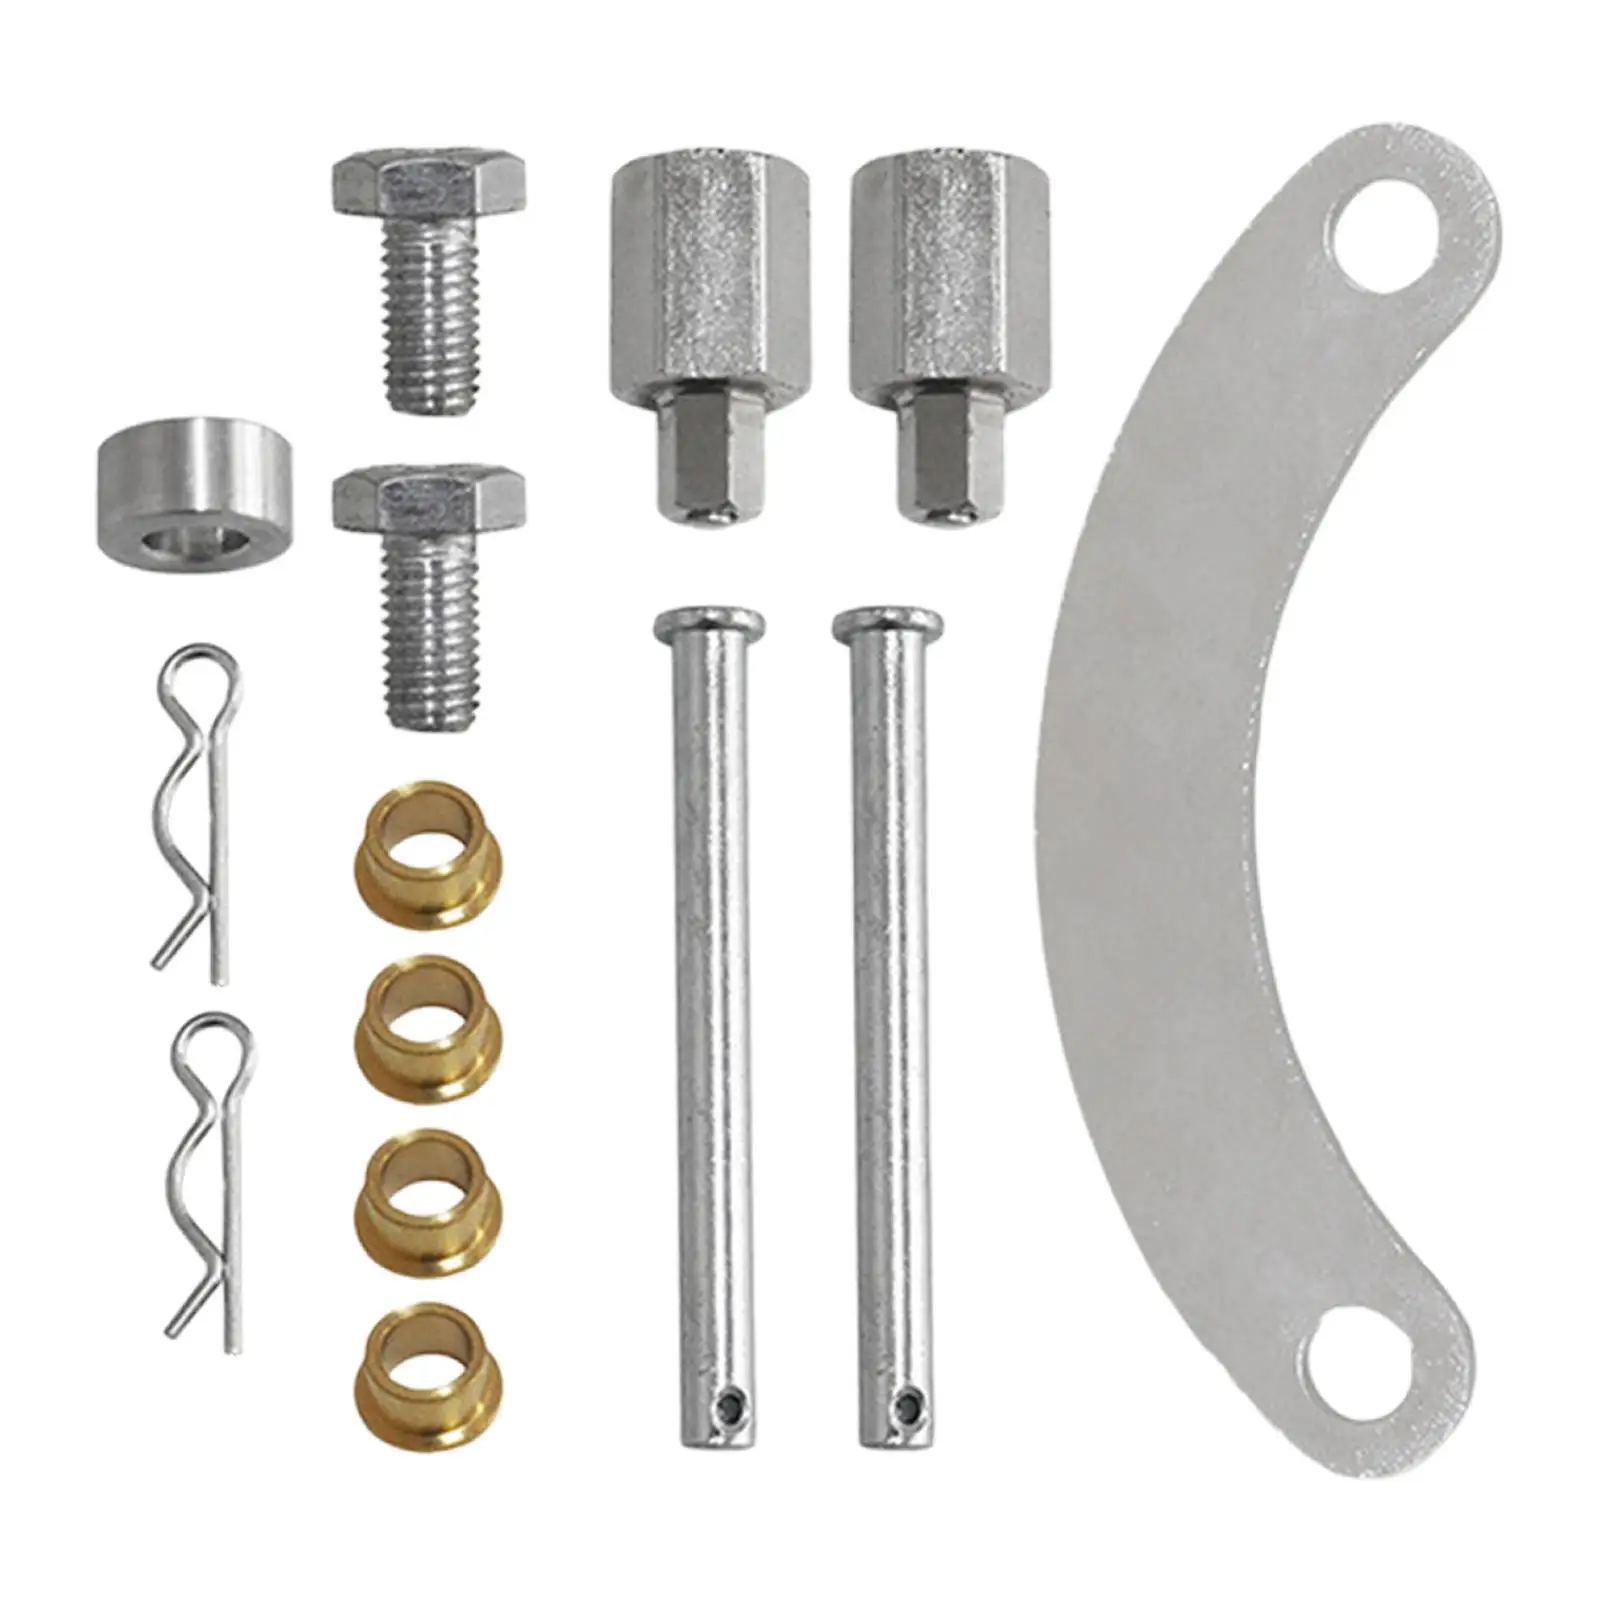 cam Gear Lock set Replaces Accessories for Subaru WRX Sti Fxt Lgt Durable Assembly Professional Easy to Install